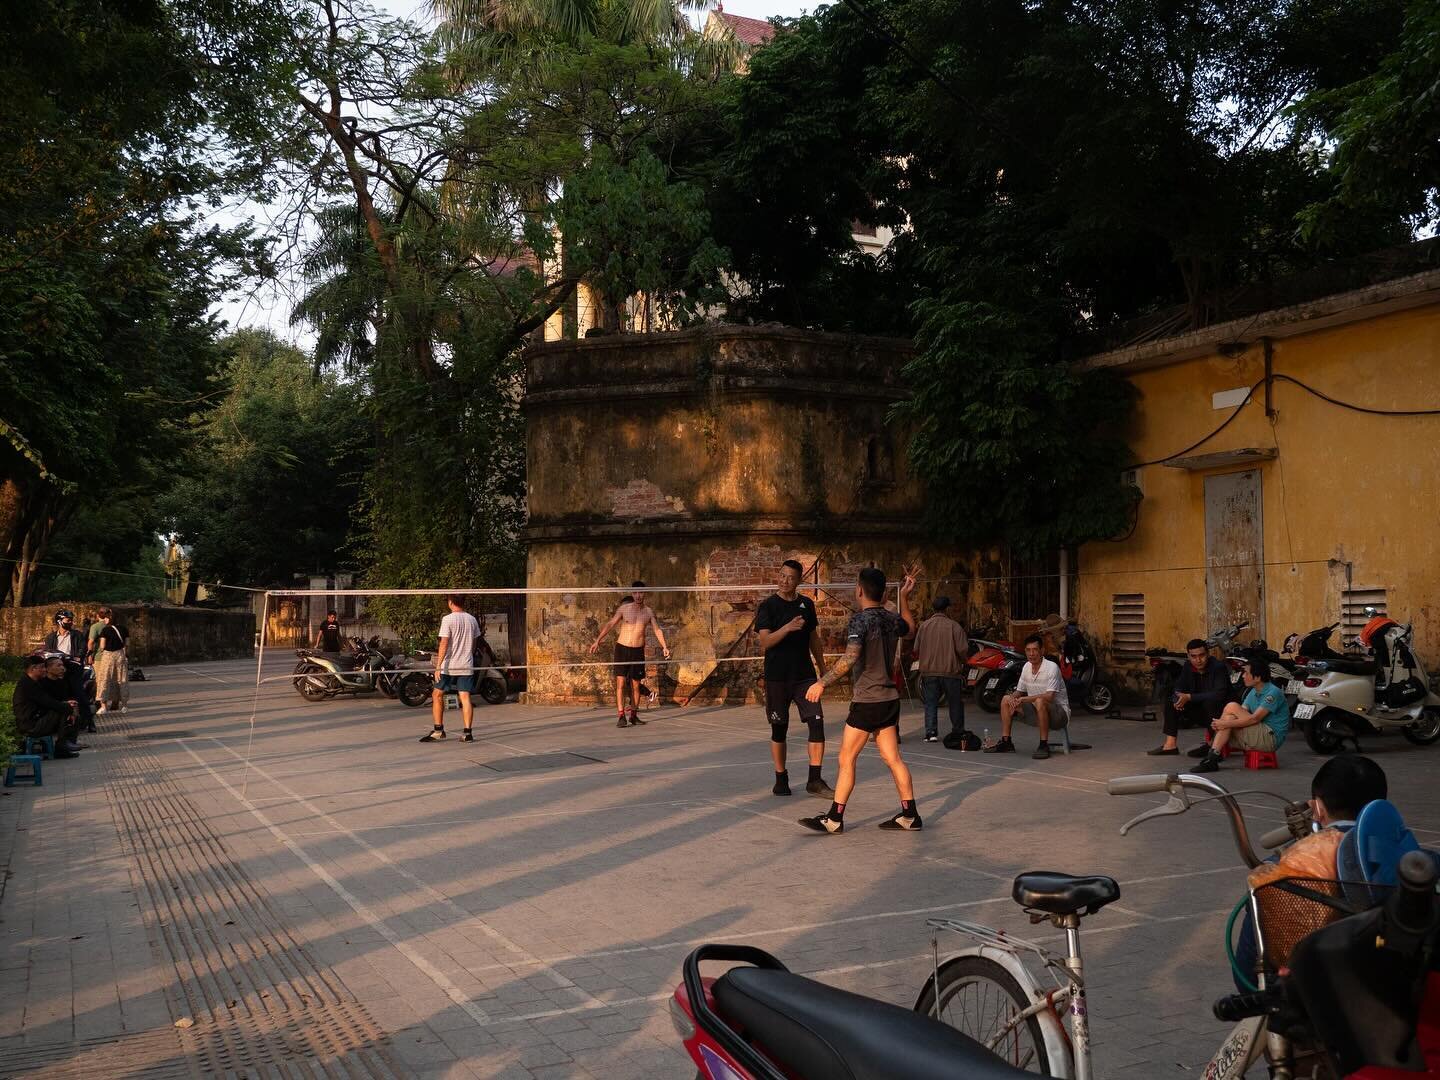 Đ&aacute; Cầu, the national sport of Vietnam

Originating from China centuries ago, Đ&aacute; Cầu is a traditional game widely played in South-East Asian countries. Combining elements of soccer and hacky sack, the two teams play on a badminton court.